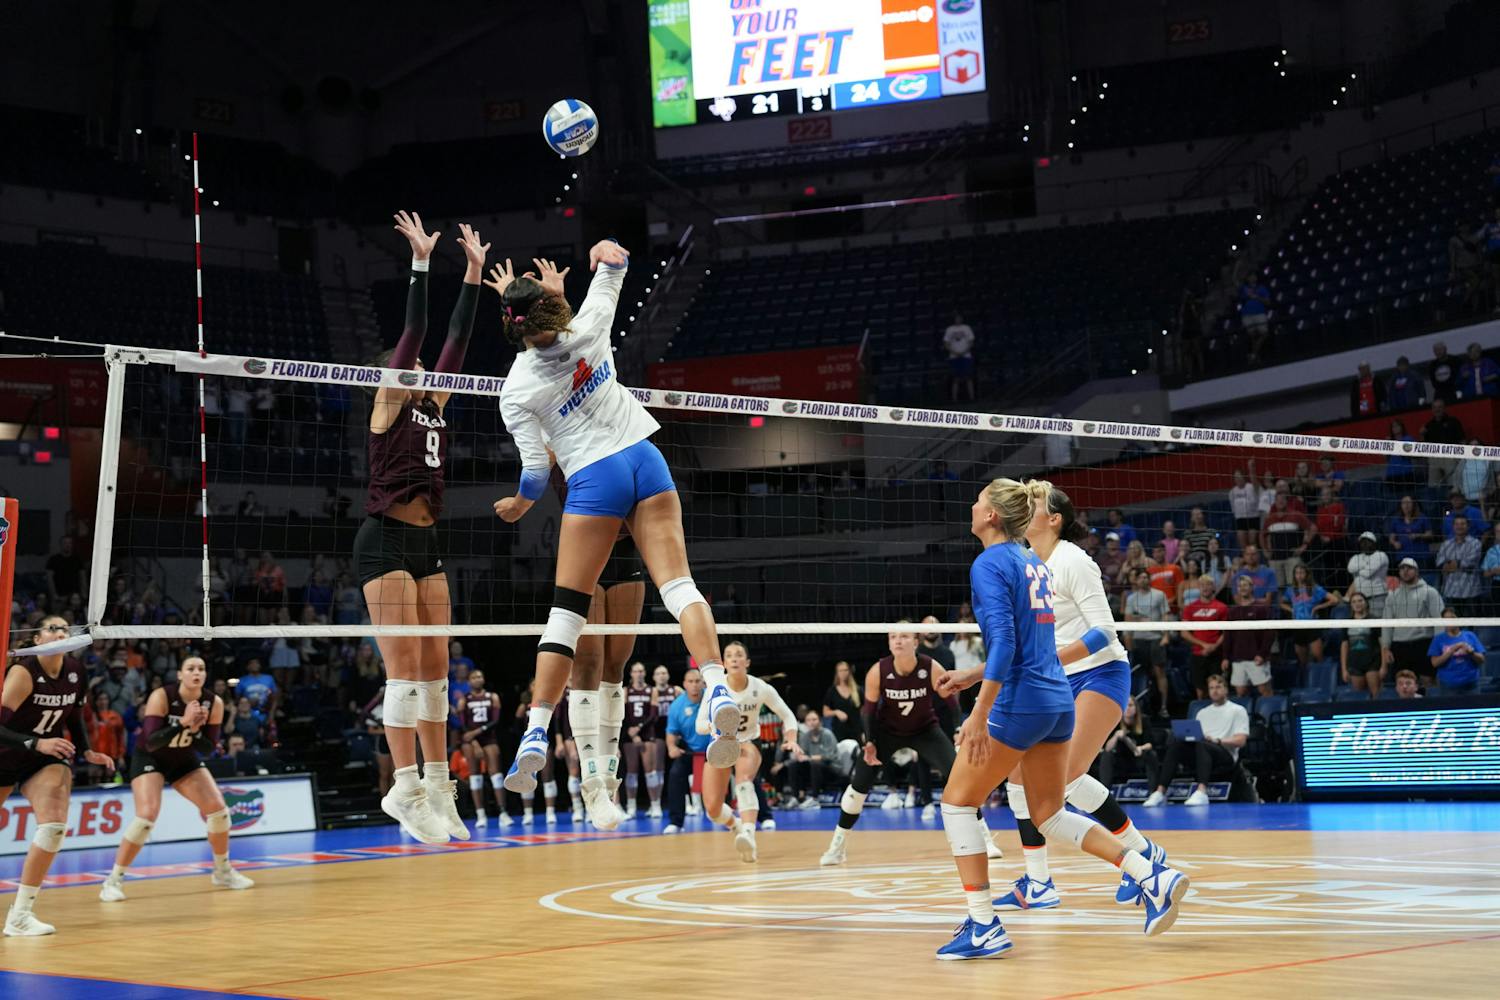 Senior outside hitter Sofia Victoria spikes the ball in the Gators' 3-2 loss against the Texas A&M Aggies on Wednesday, Sept. 27, 2023.